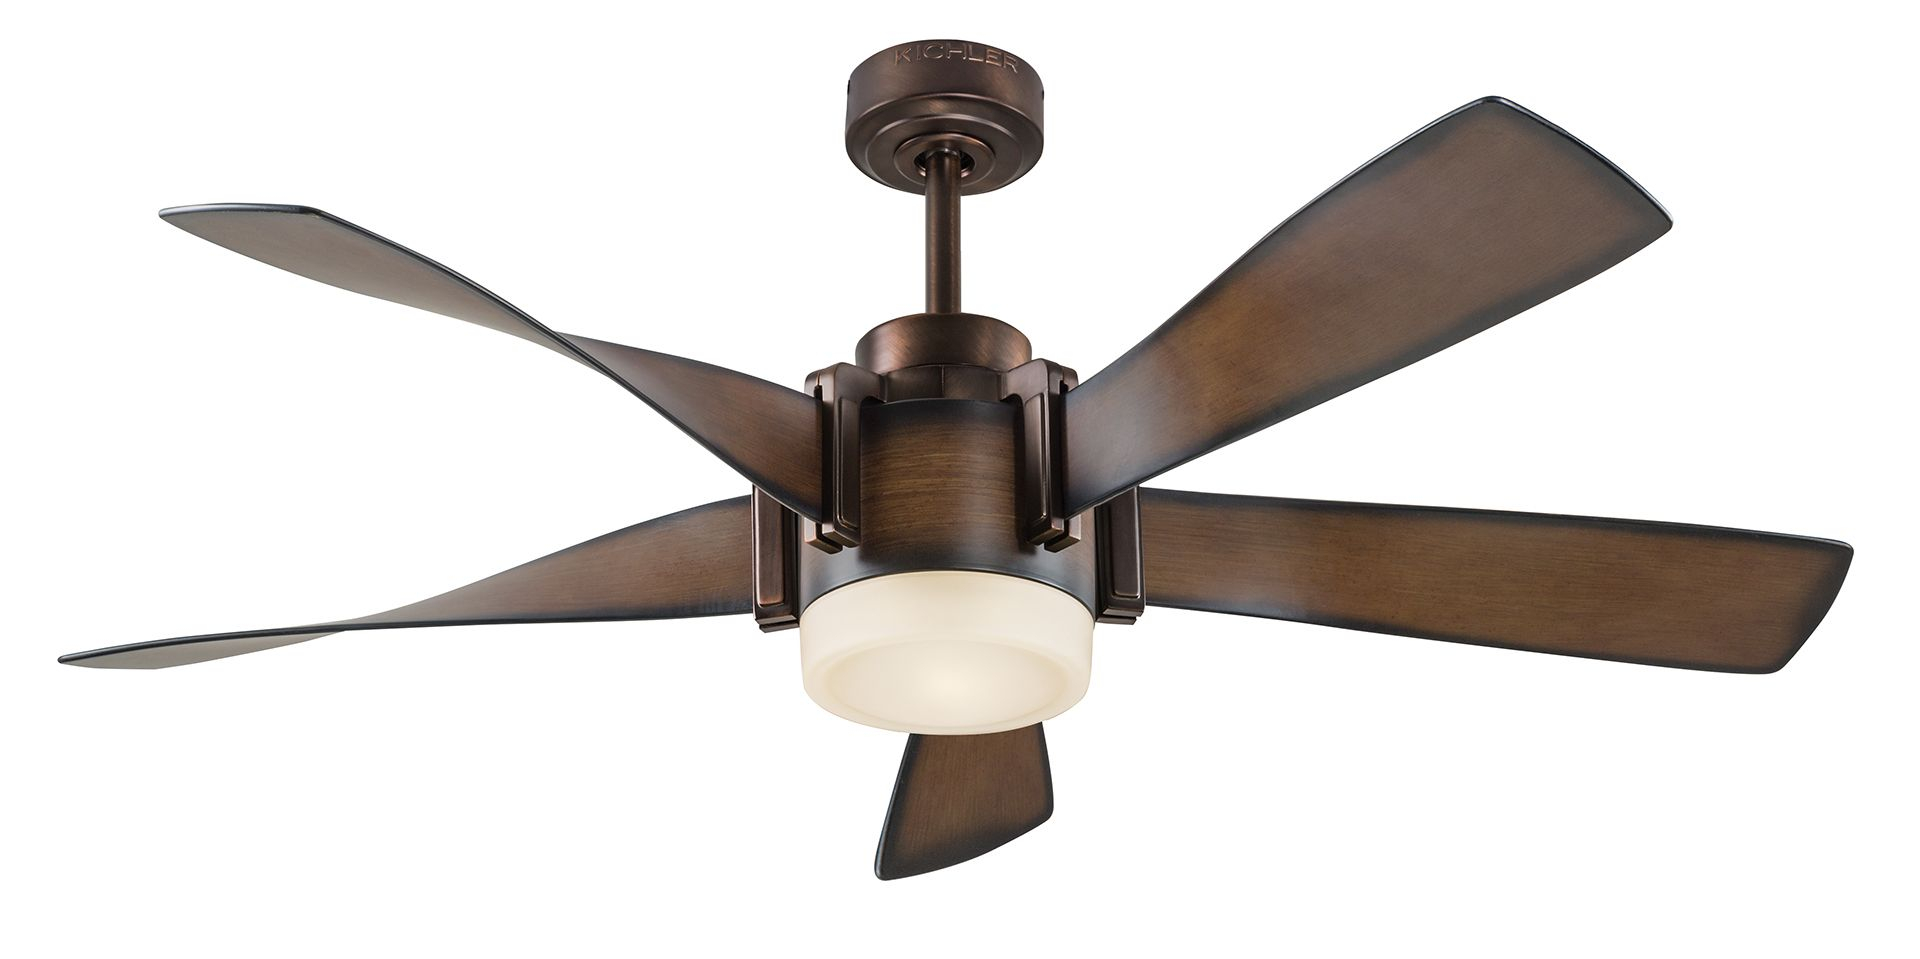 Kichler 52 In Brown Led Indoor Ceiling Fan With Light Kit in measurements 1920 X 959